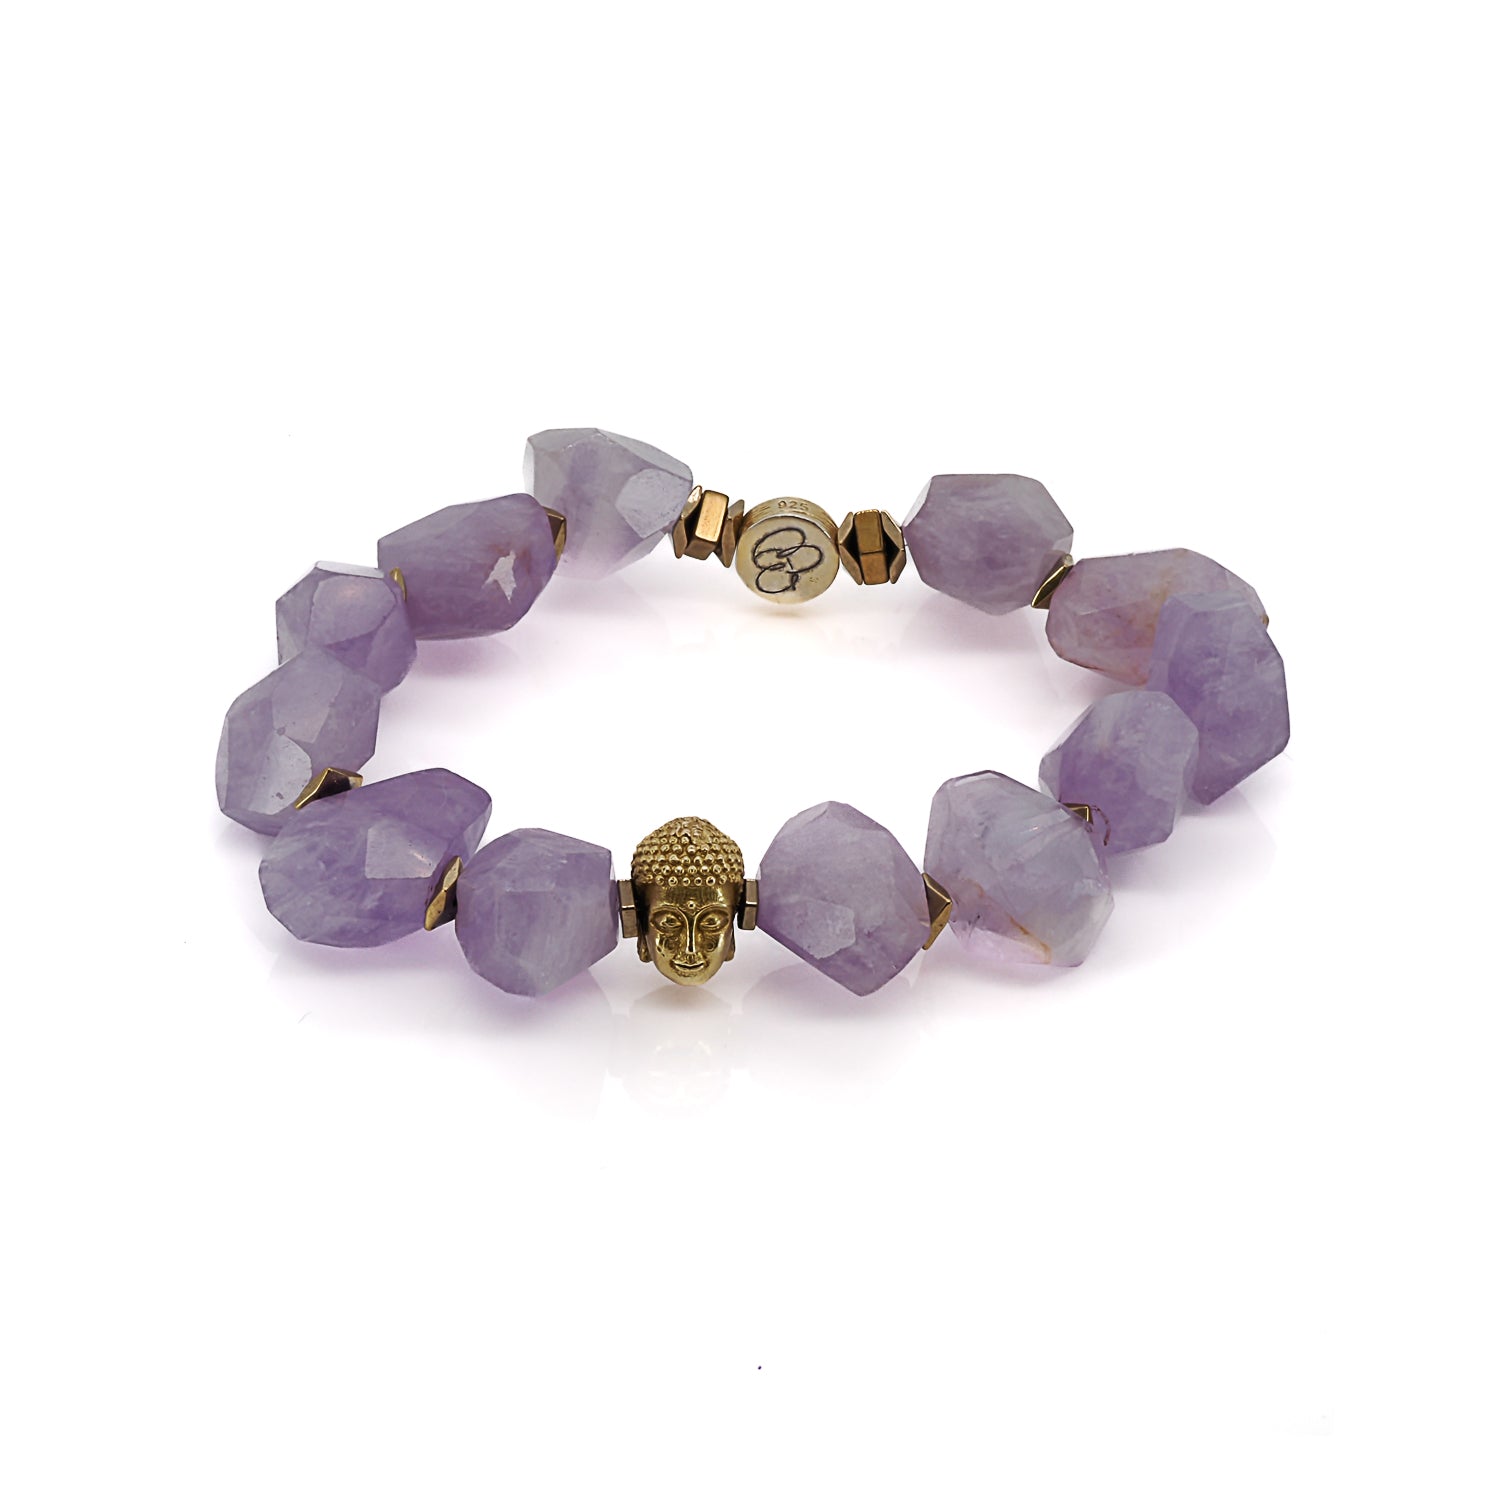 This bracelet harmoniously blends spiritual significance with luxury craftsmanship, featuring natural amethyst stones and a meticulously handcrafted solid gold Buddha bead.